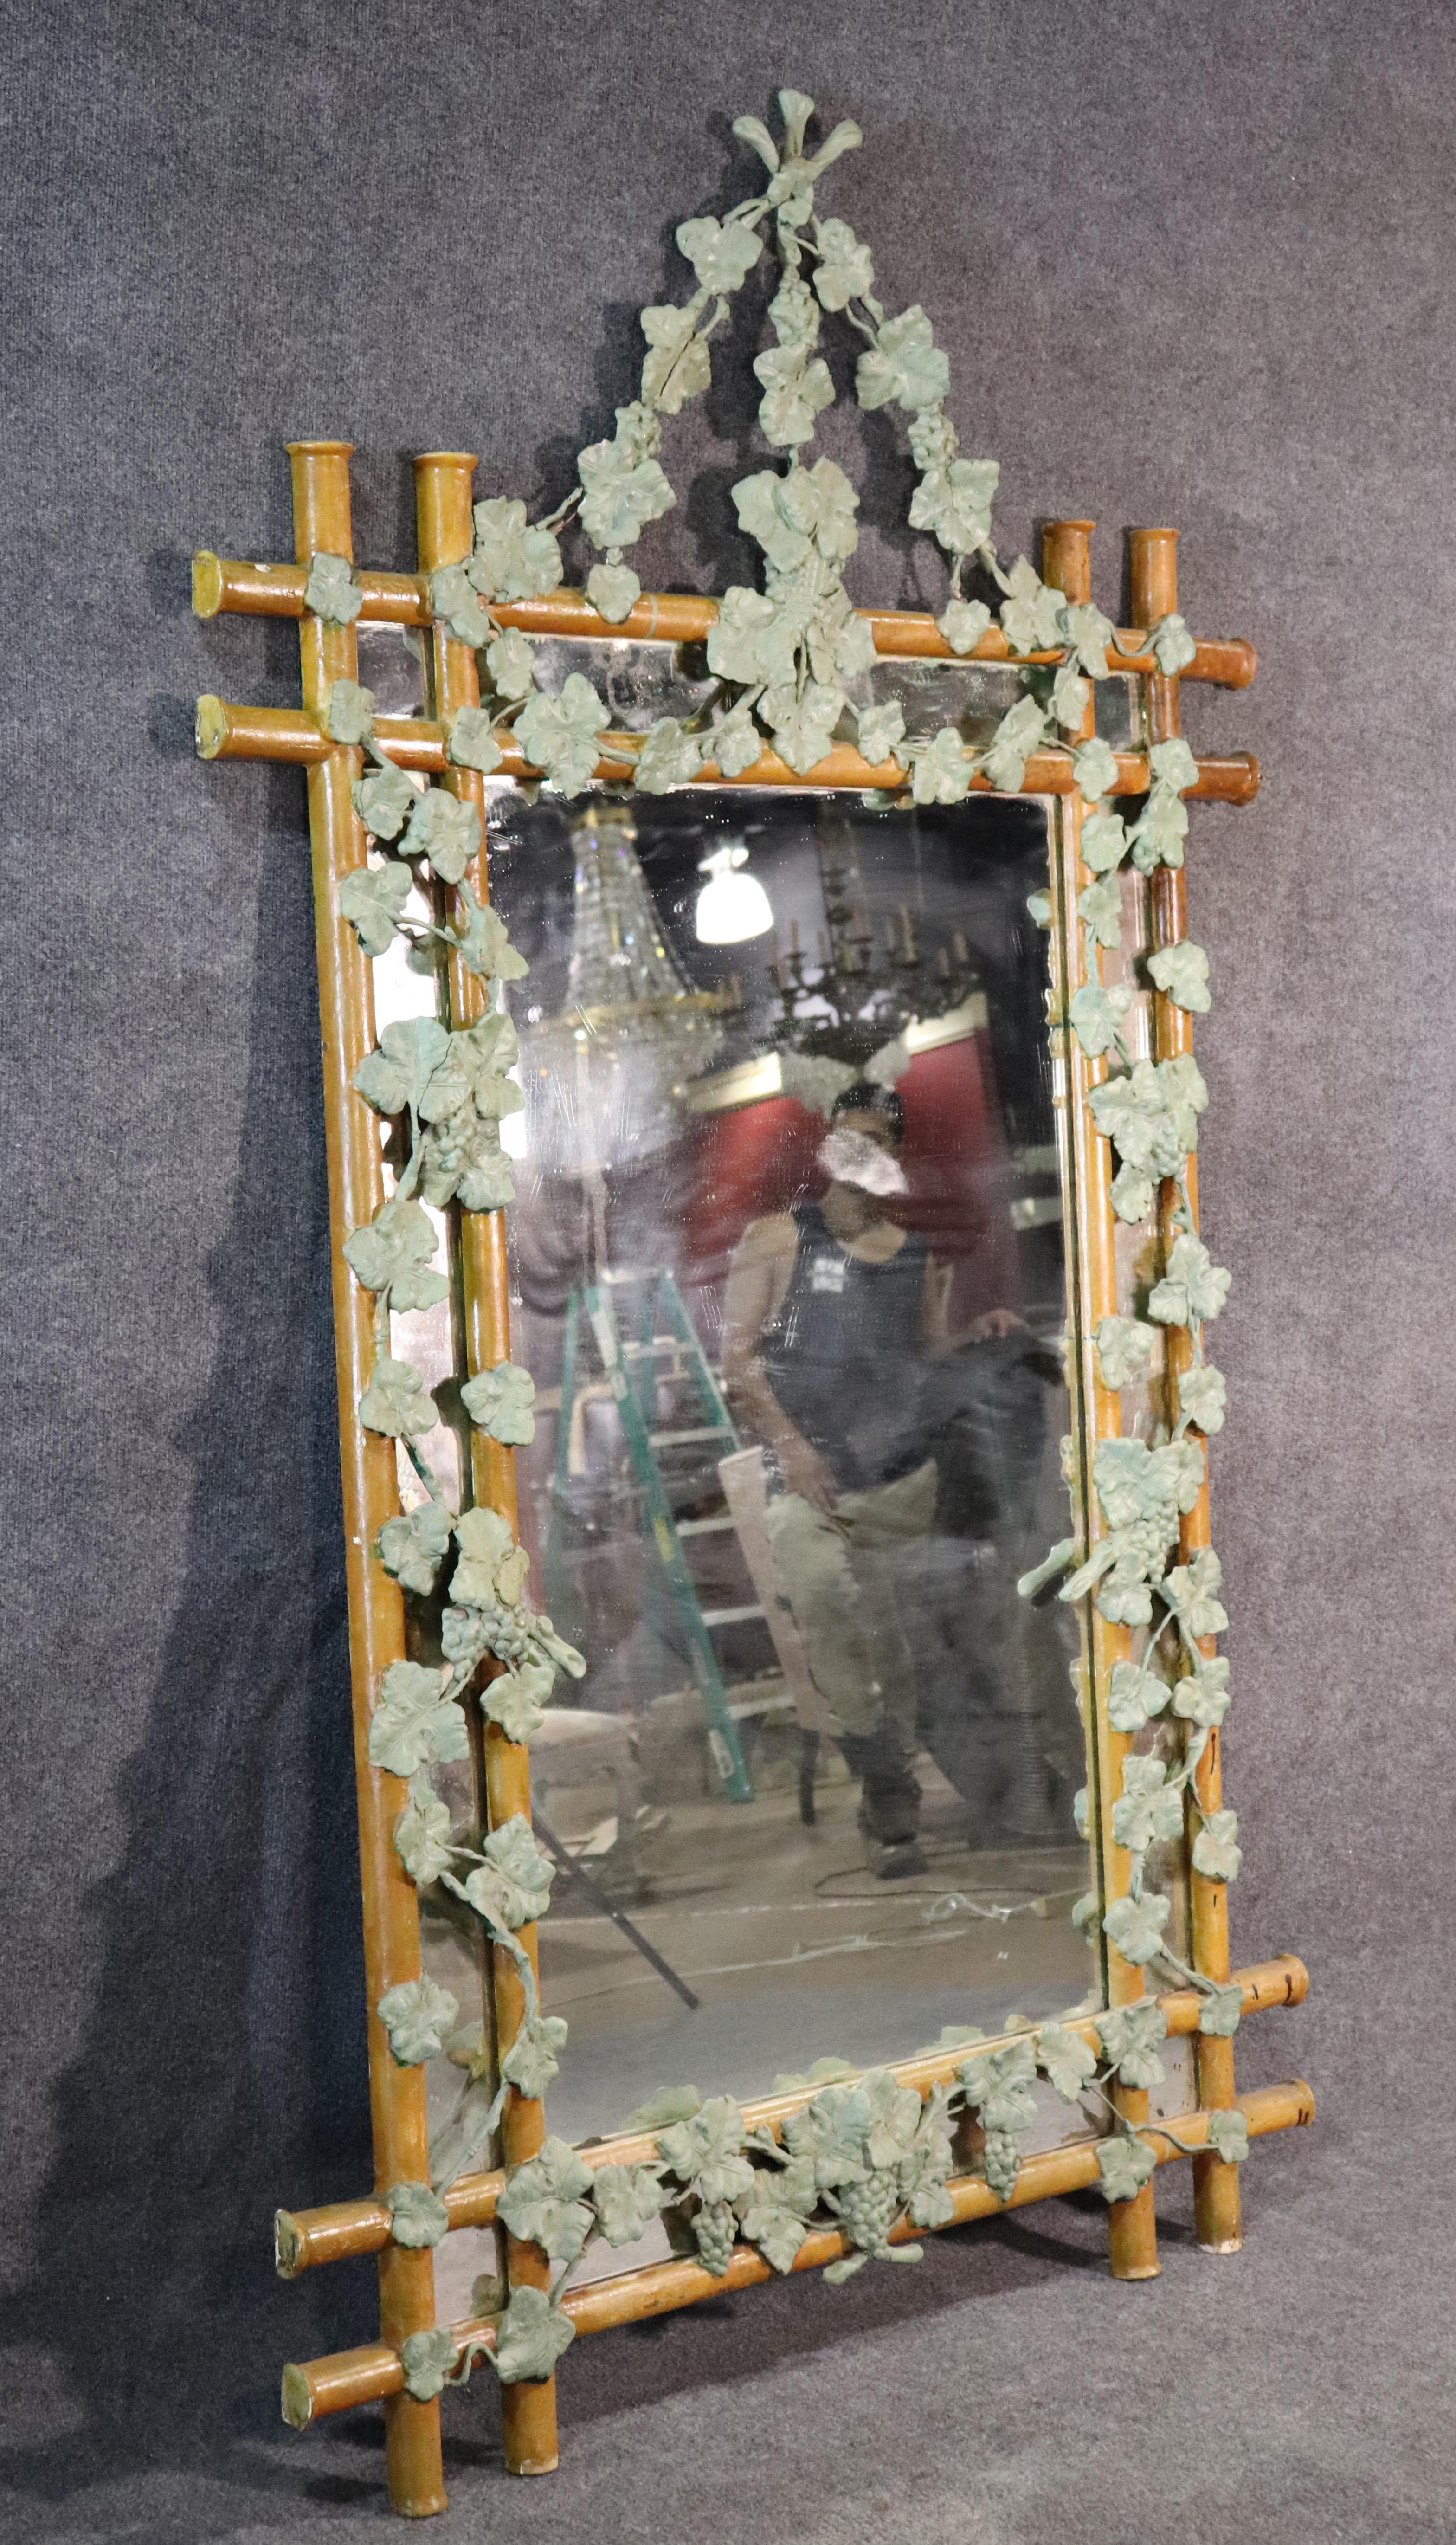 This is a rare French made faux bois mirror with beautiful green painted ivy surrounding the frame. This is a sophisticated mirror with incredible detail and great patina.
Measures: 82 tall x 48.5 wide x 1.75 inches deep.